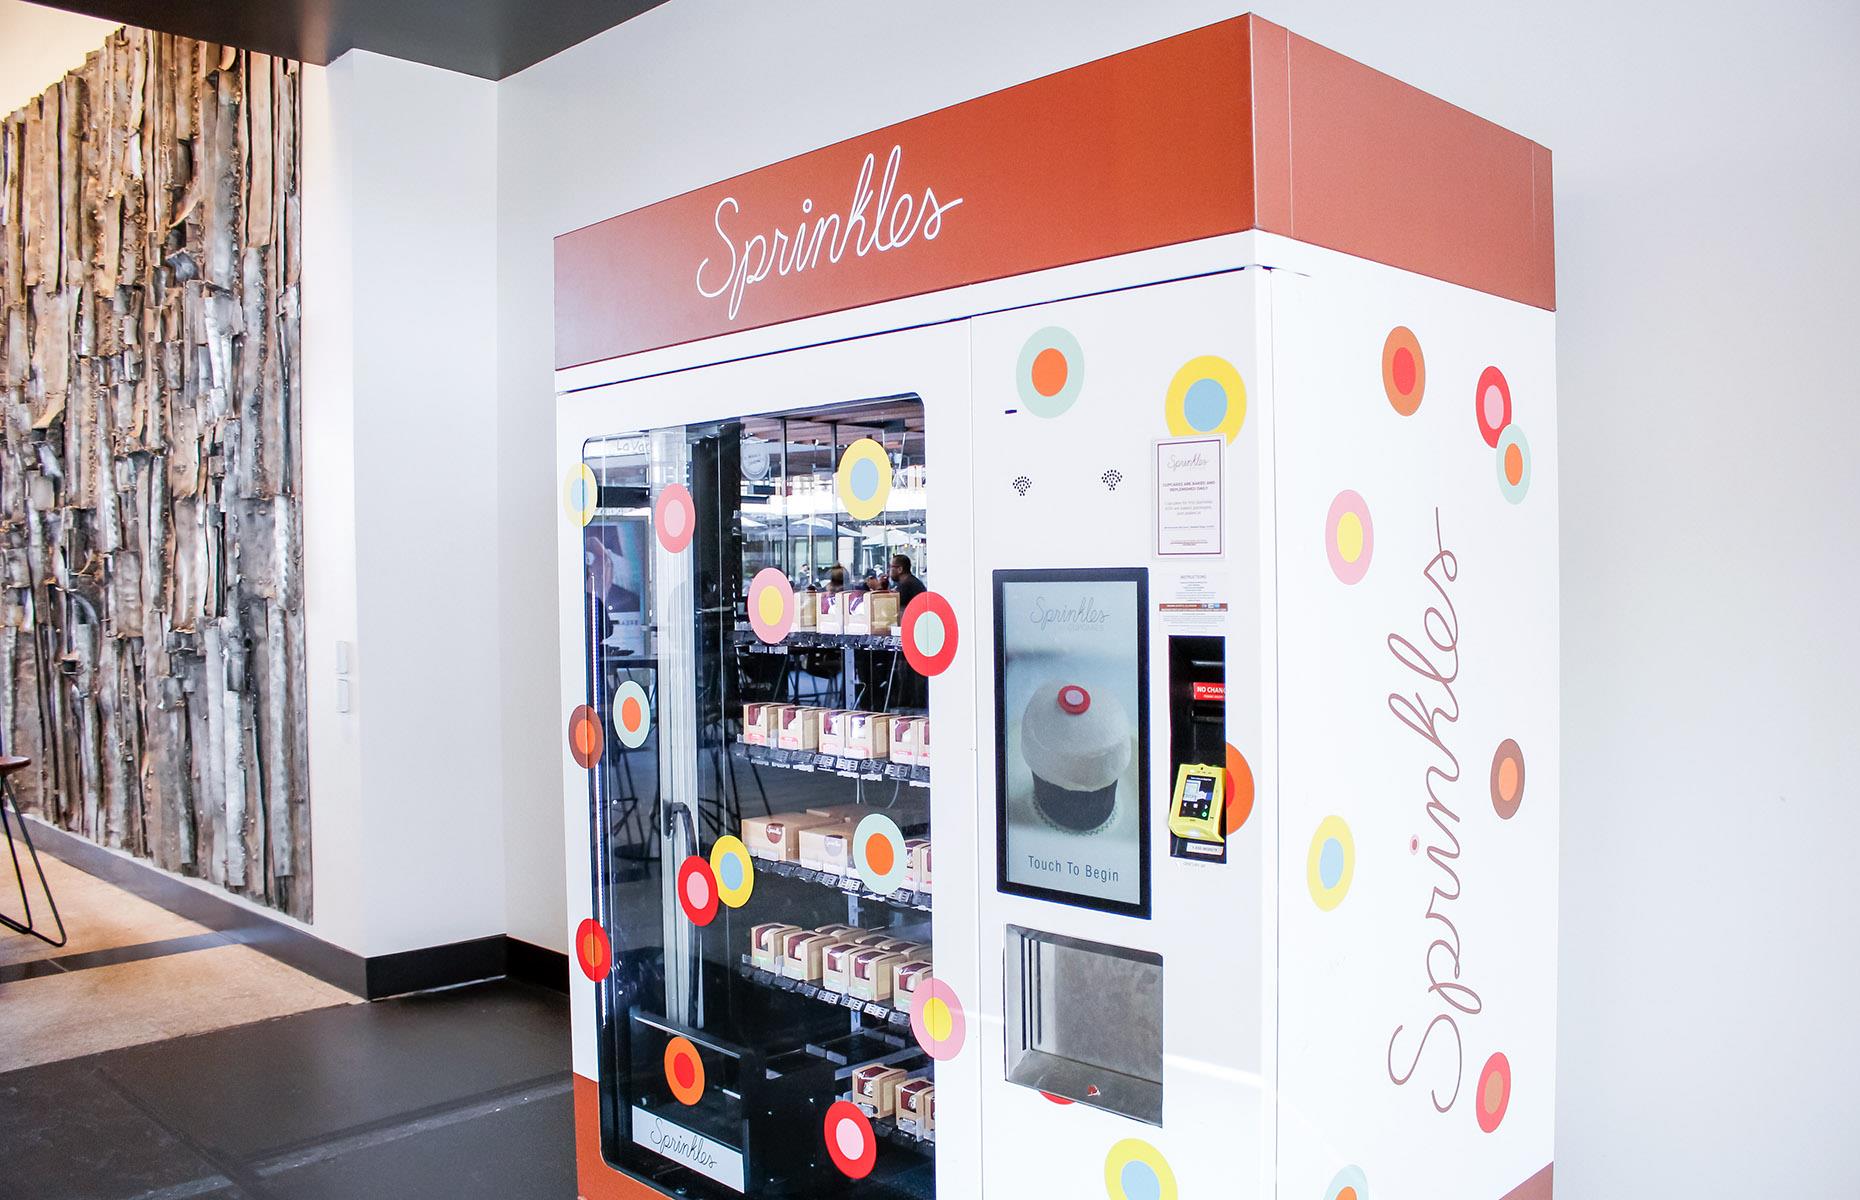 A day in the life of (almost) every vending machine in the world